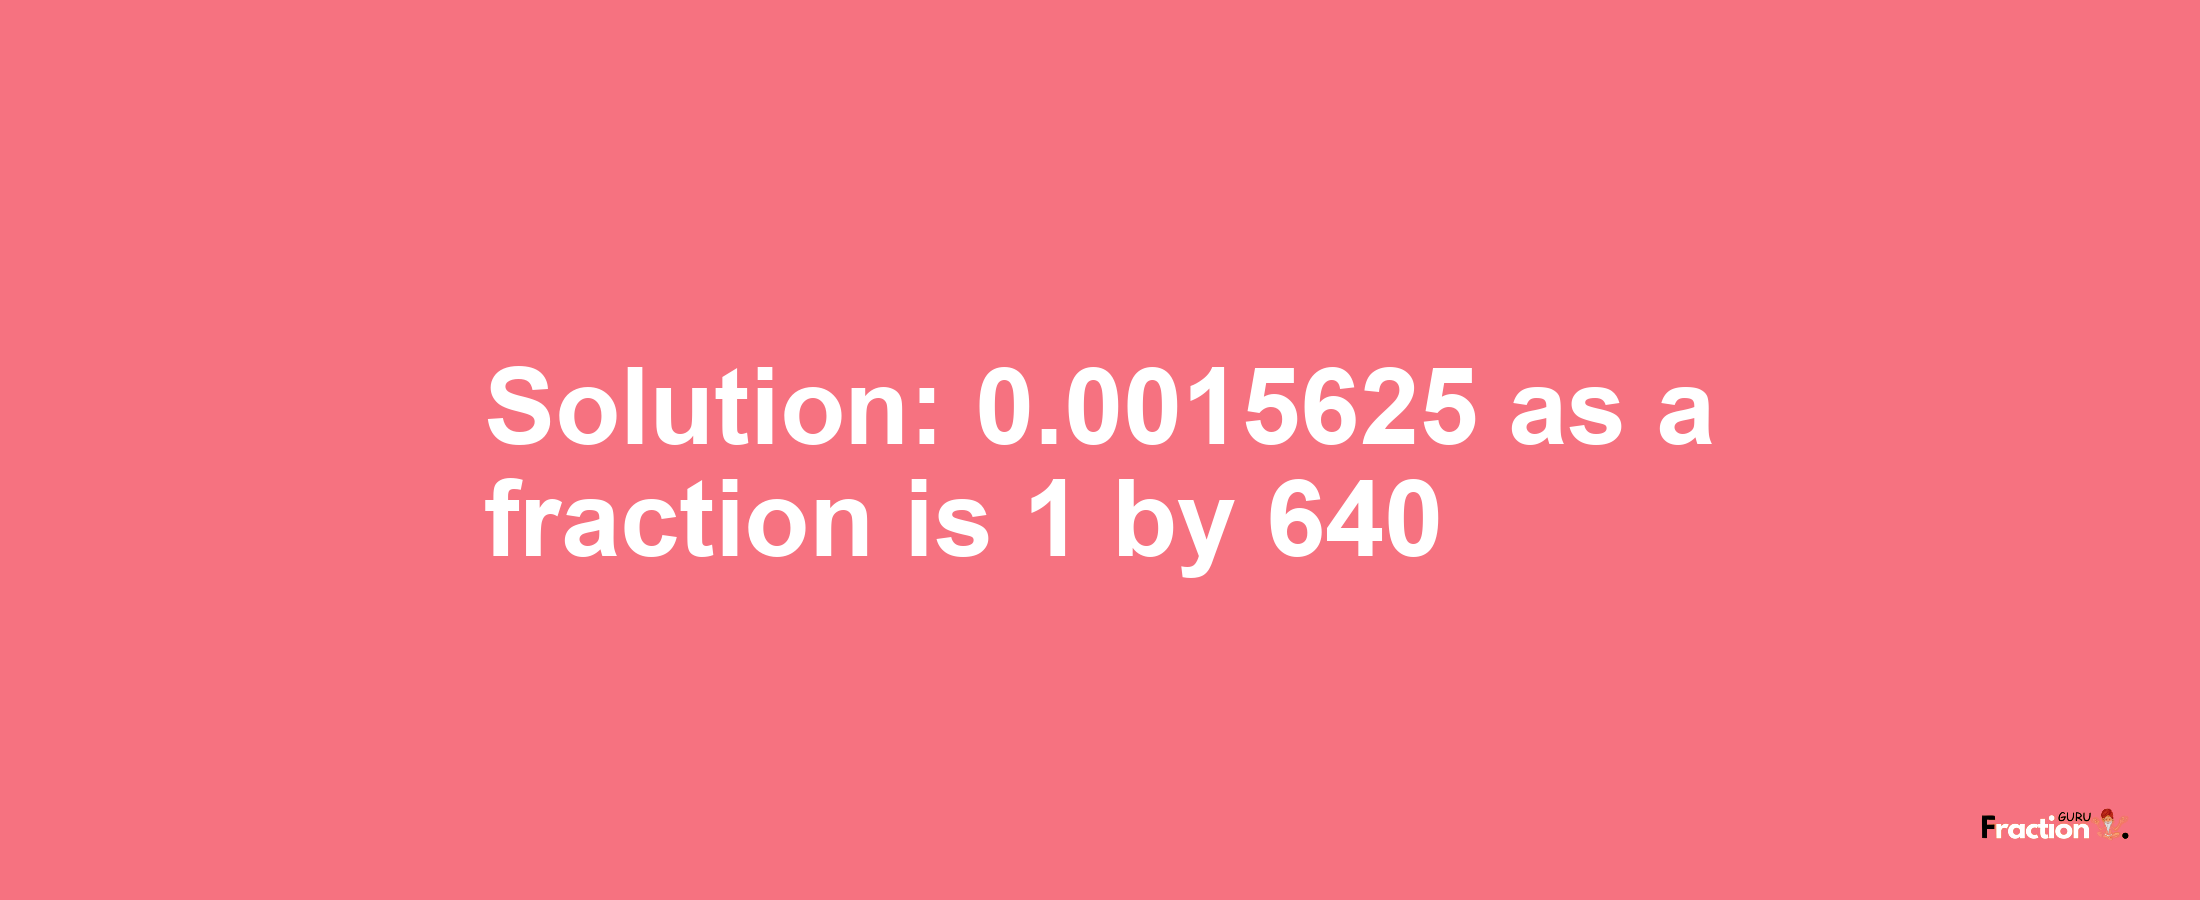 Solution:0.0015625 as a fraction is 1/640